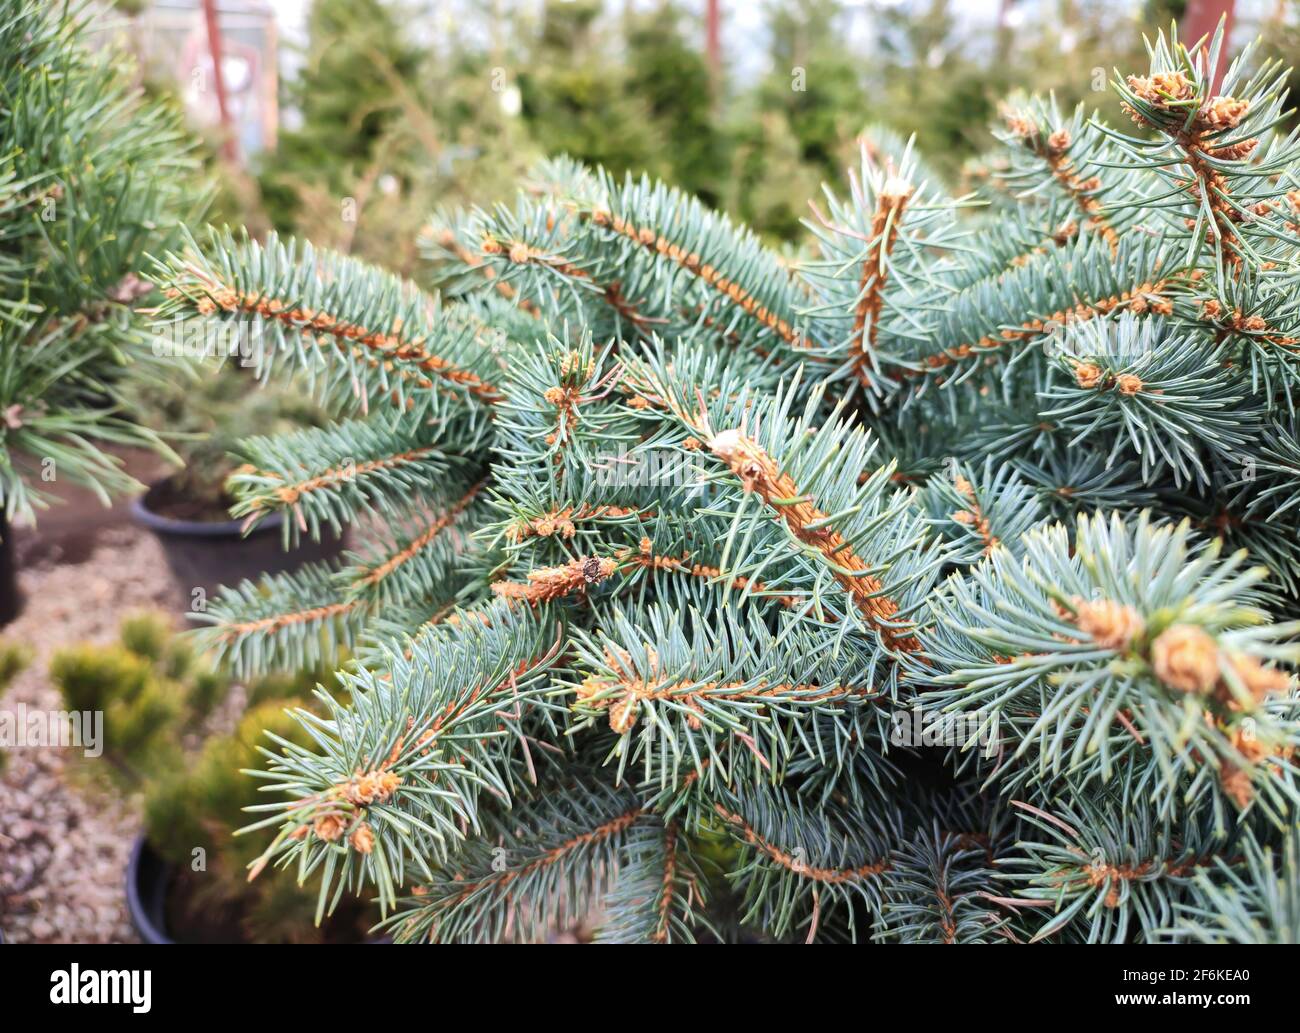 Blue spruce branch with needles close-up. Christmas tree in nature. Nature background Stock Photo